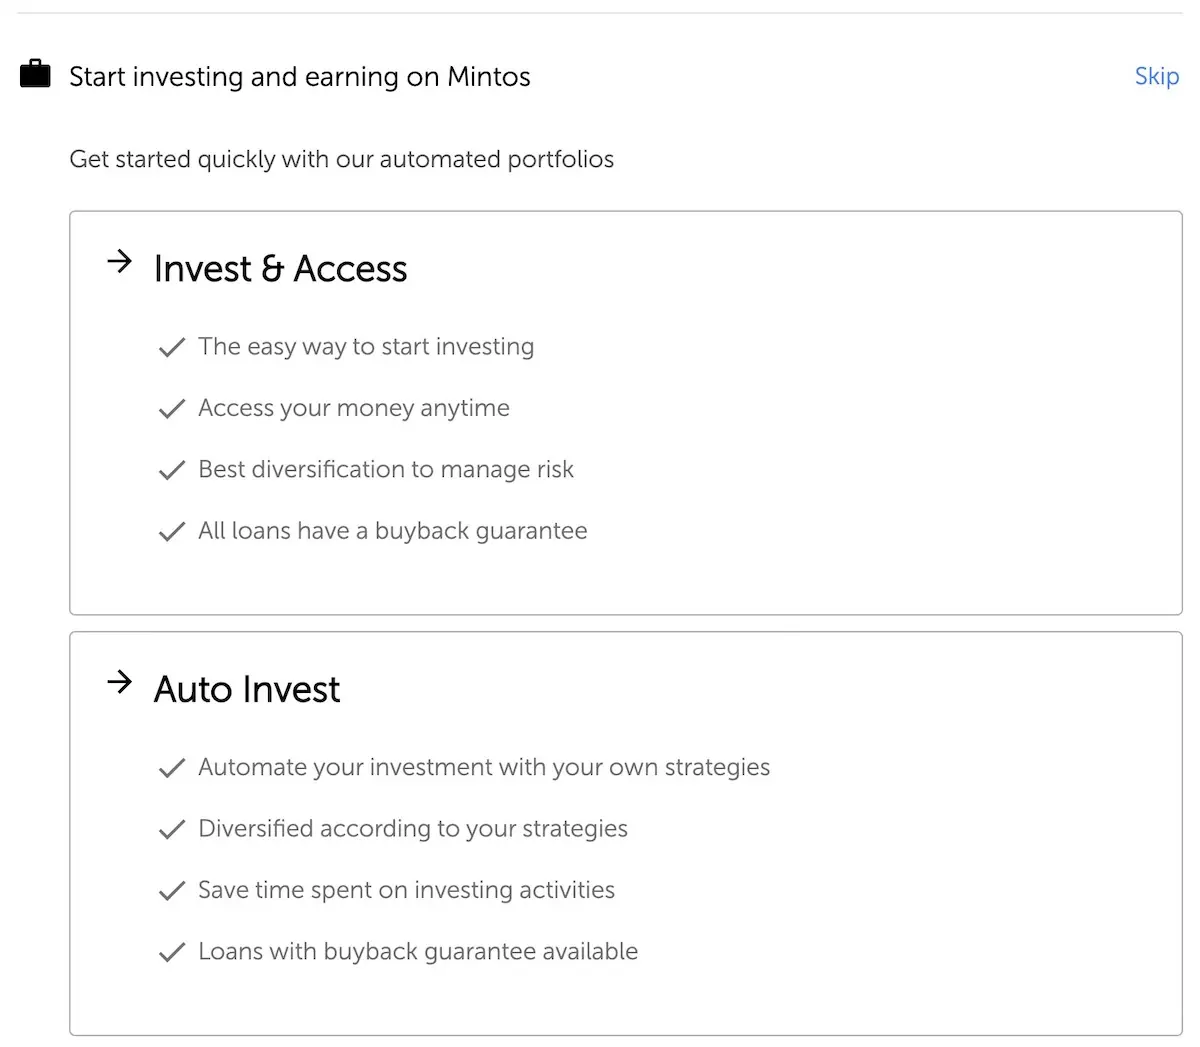 If you scroll down on the previous view you can see the two types of Mintos' automated portfolios